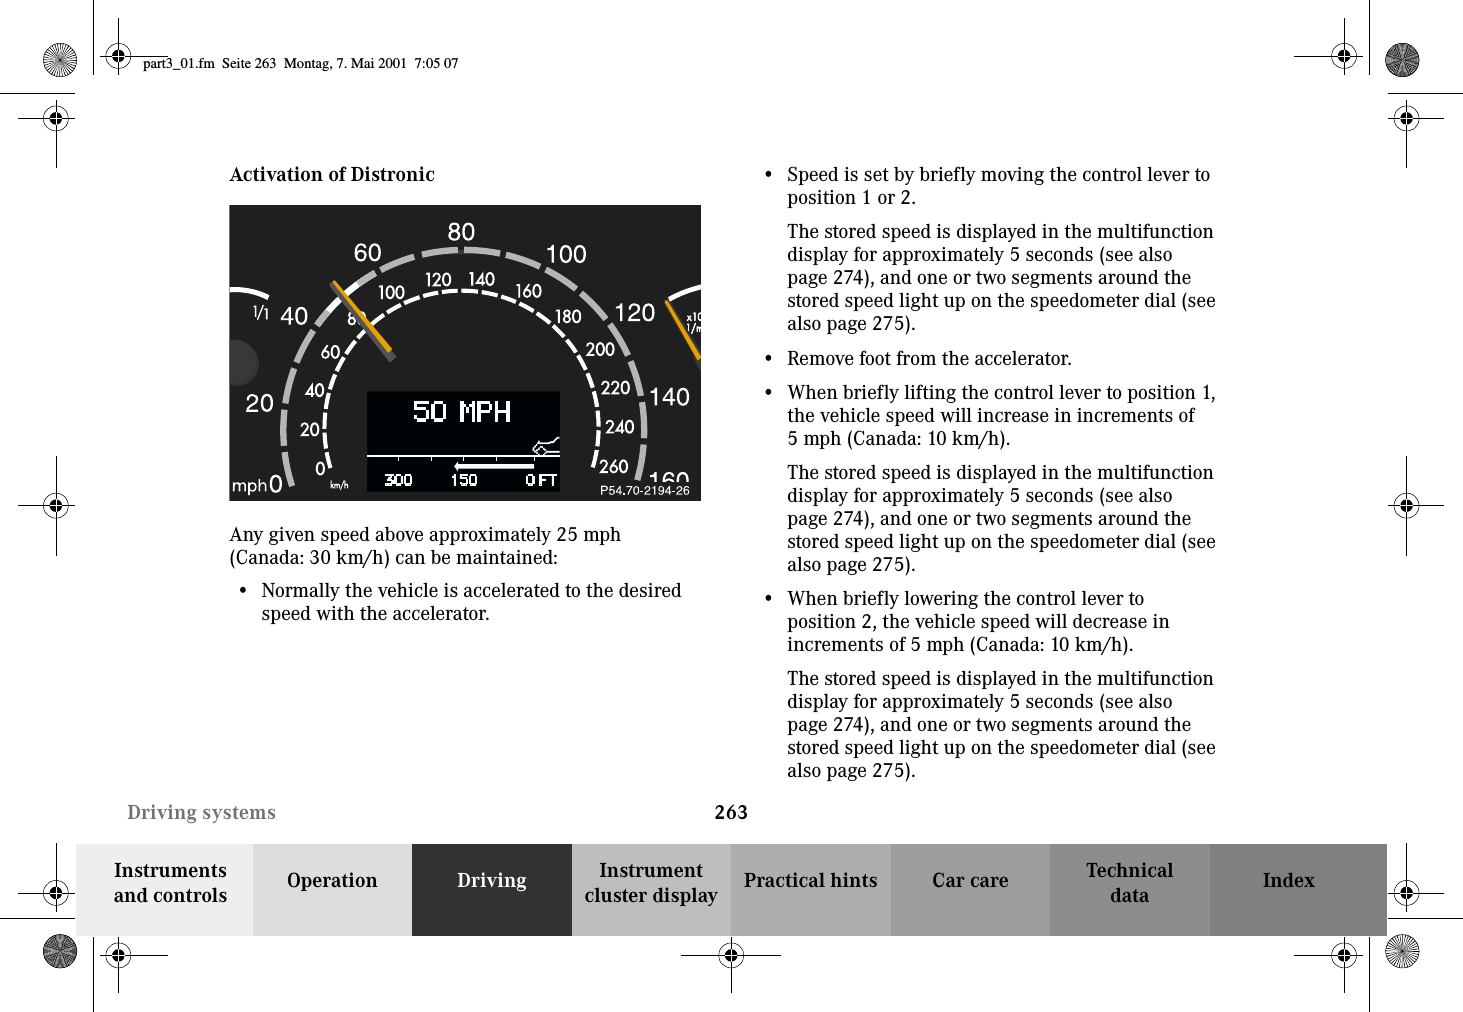 263Driving systemsTechnicaldataInstruments and controls Operation Driving Instrument cluster display Practical hints Car care IndexActivation of DistronicAny given speed above approximately 25 mph (Canada: 30 km/h) can be maintained:•Normally the vehicle is accelerated to the desired speed with the accelerator.•Speed is set by briefly moving the control lever to position 1 or 2.The stored speed is displayed in the multifunction display for approximately 5 seconds (see also page 274), and one or two segments around the stored speed light up on the speedometer dial (see also page 275).•Remove foot from the accelerator.•When briefly lifting the control lever to position 1, the vehicle speed will increase in increments of 5mph (Canada:10km/h).The stored speed is displayed in the multifunction display for approximately 5 seconds (see also page 274), and one or two segments around the stored speed light up on the speedometer dial (see also page 275).•When briefly lowering the control lever to position 2, the vehicle speed will decrease in increments of 5 mph (Canada: 10 km/h).The stored speed is displayed in the multifunction display for approximately 5 seconds (see also page 274), and one or two segments around the stored speed light up on the speedometer dial (see also page 275).part3_01.fm Seite 263 Montag, 7. Mai 2001 7:05 07